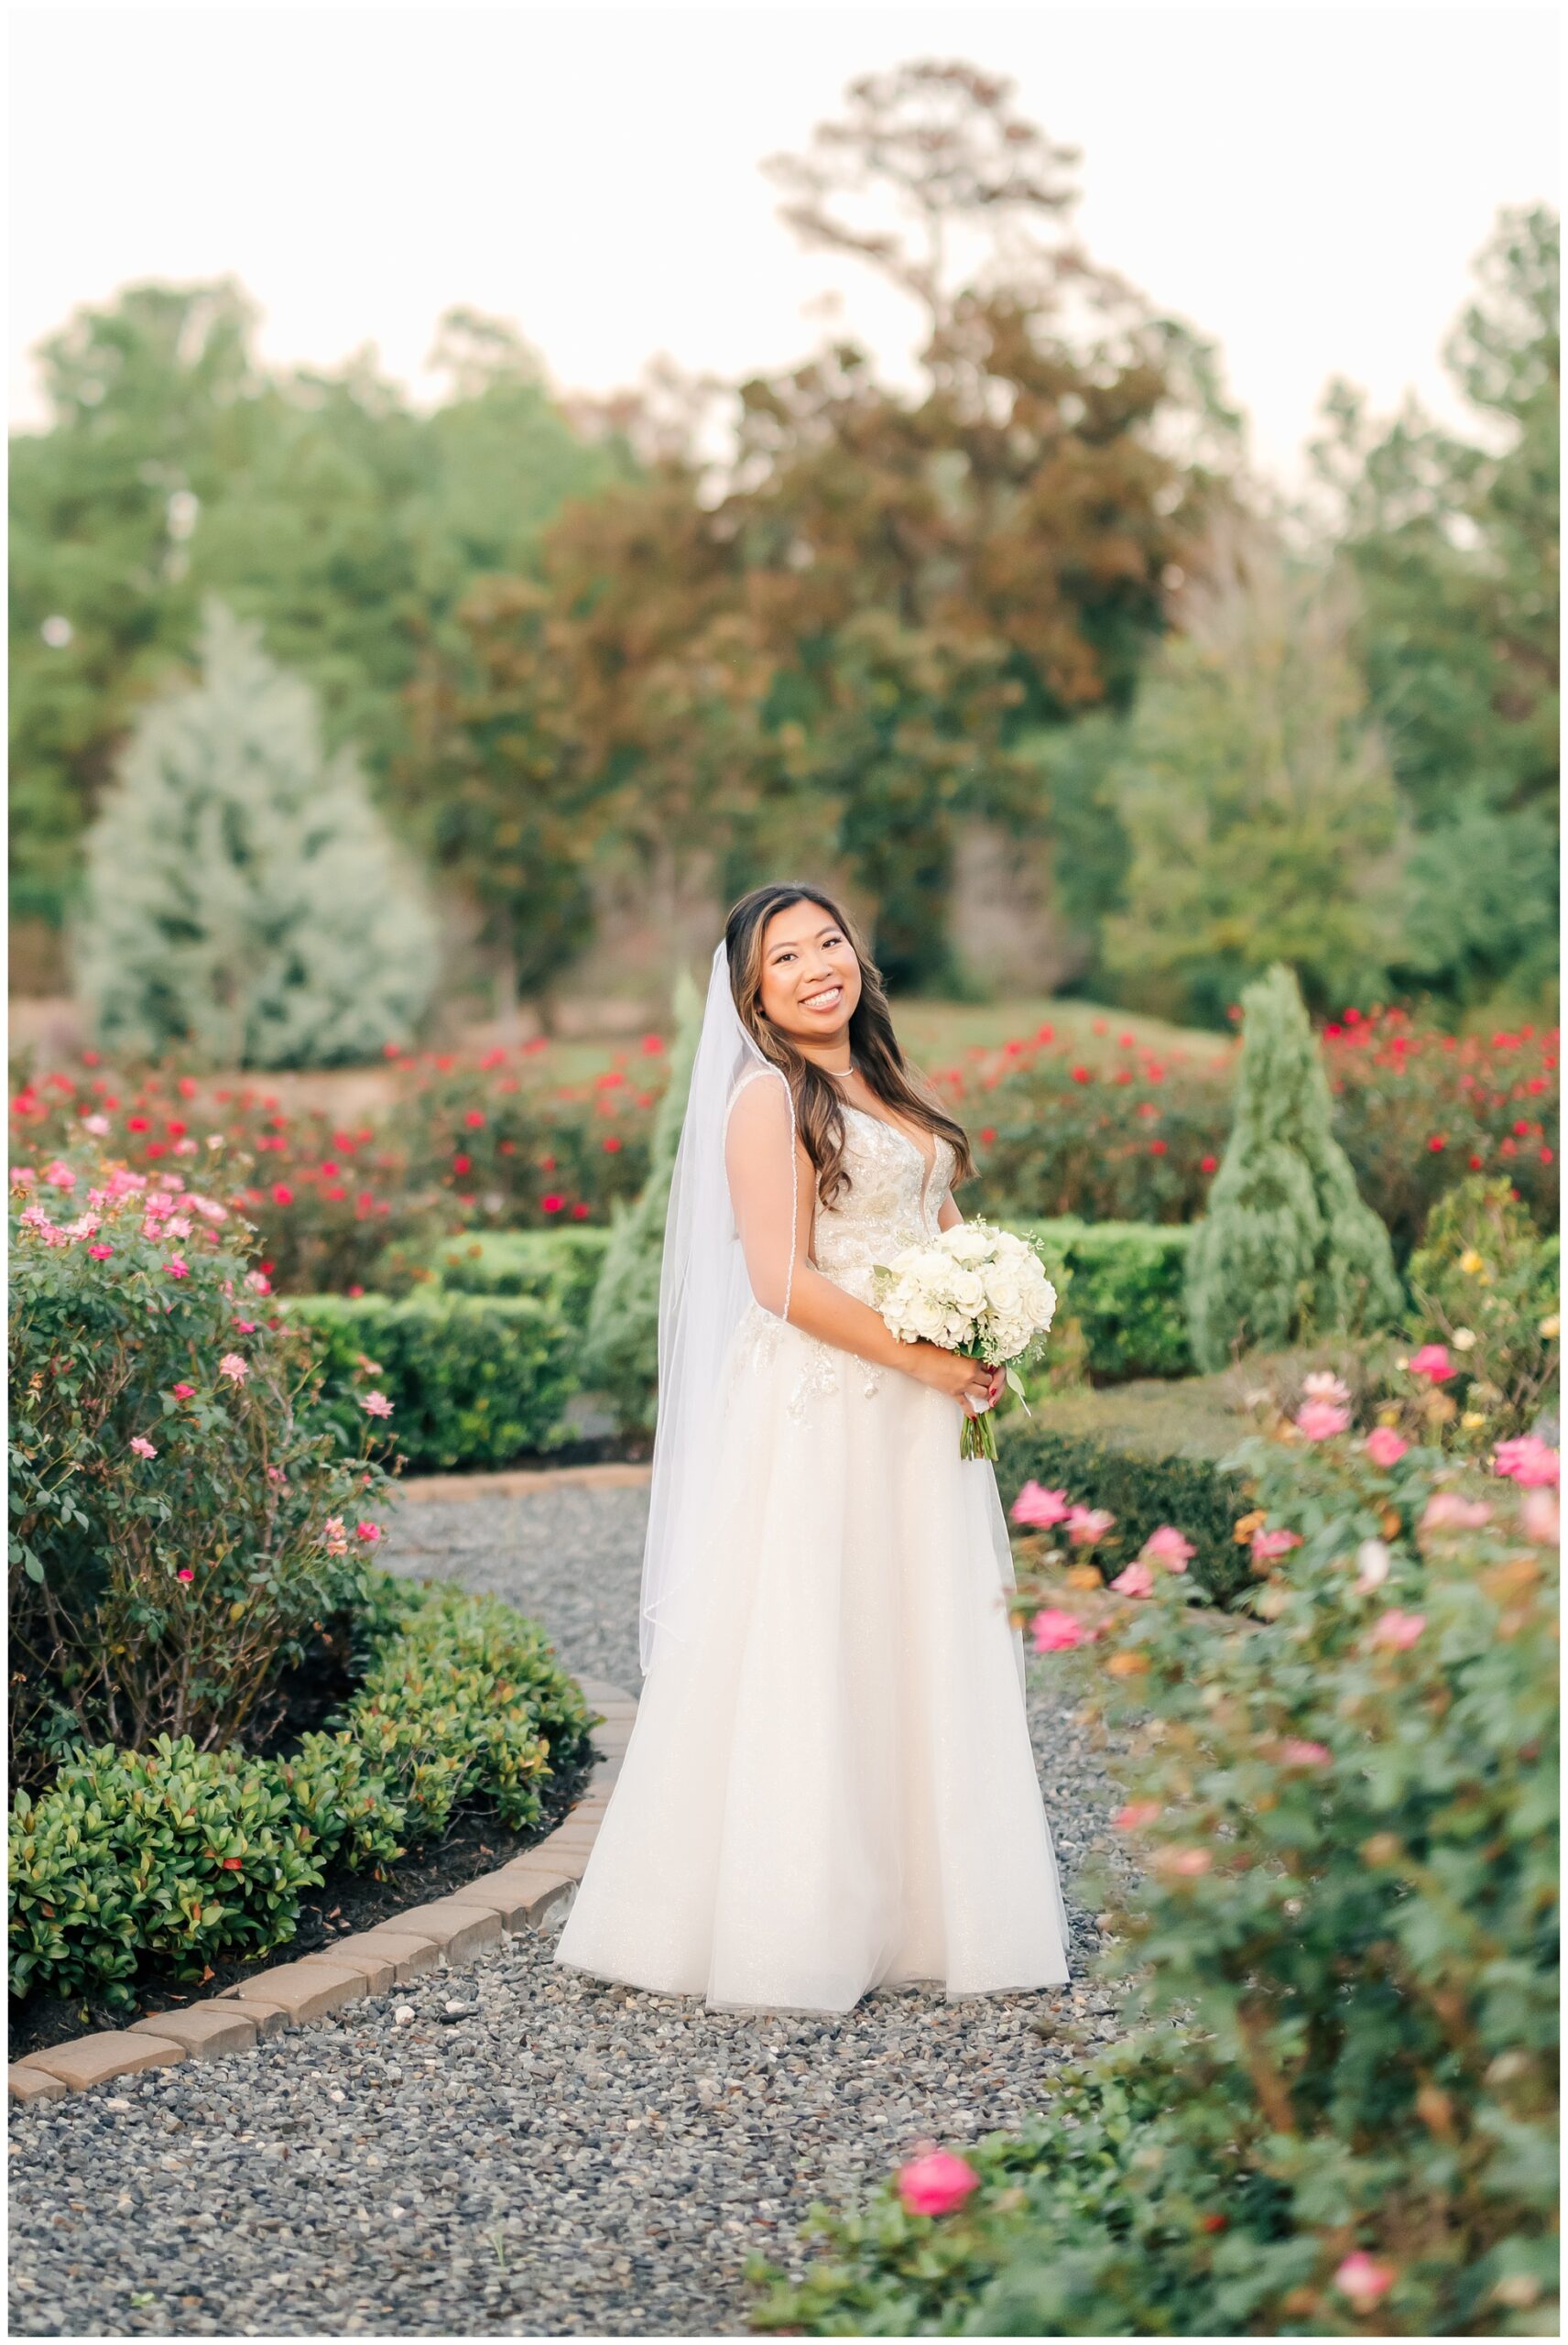 Bridal Portrait surrounded by red and pink roses in the garden at iron manor.